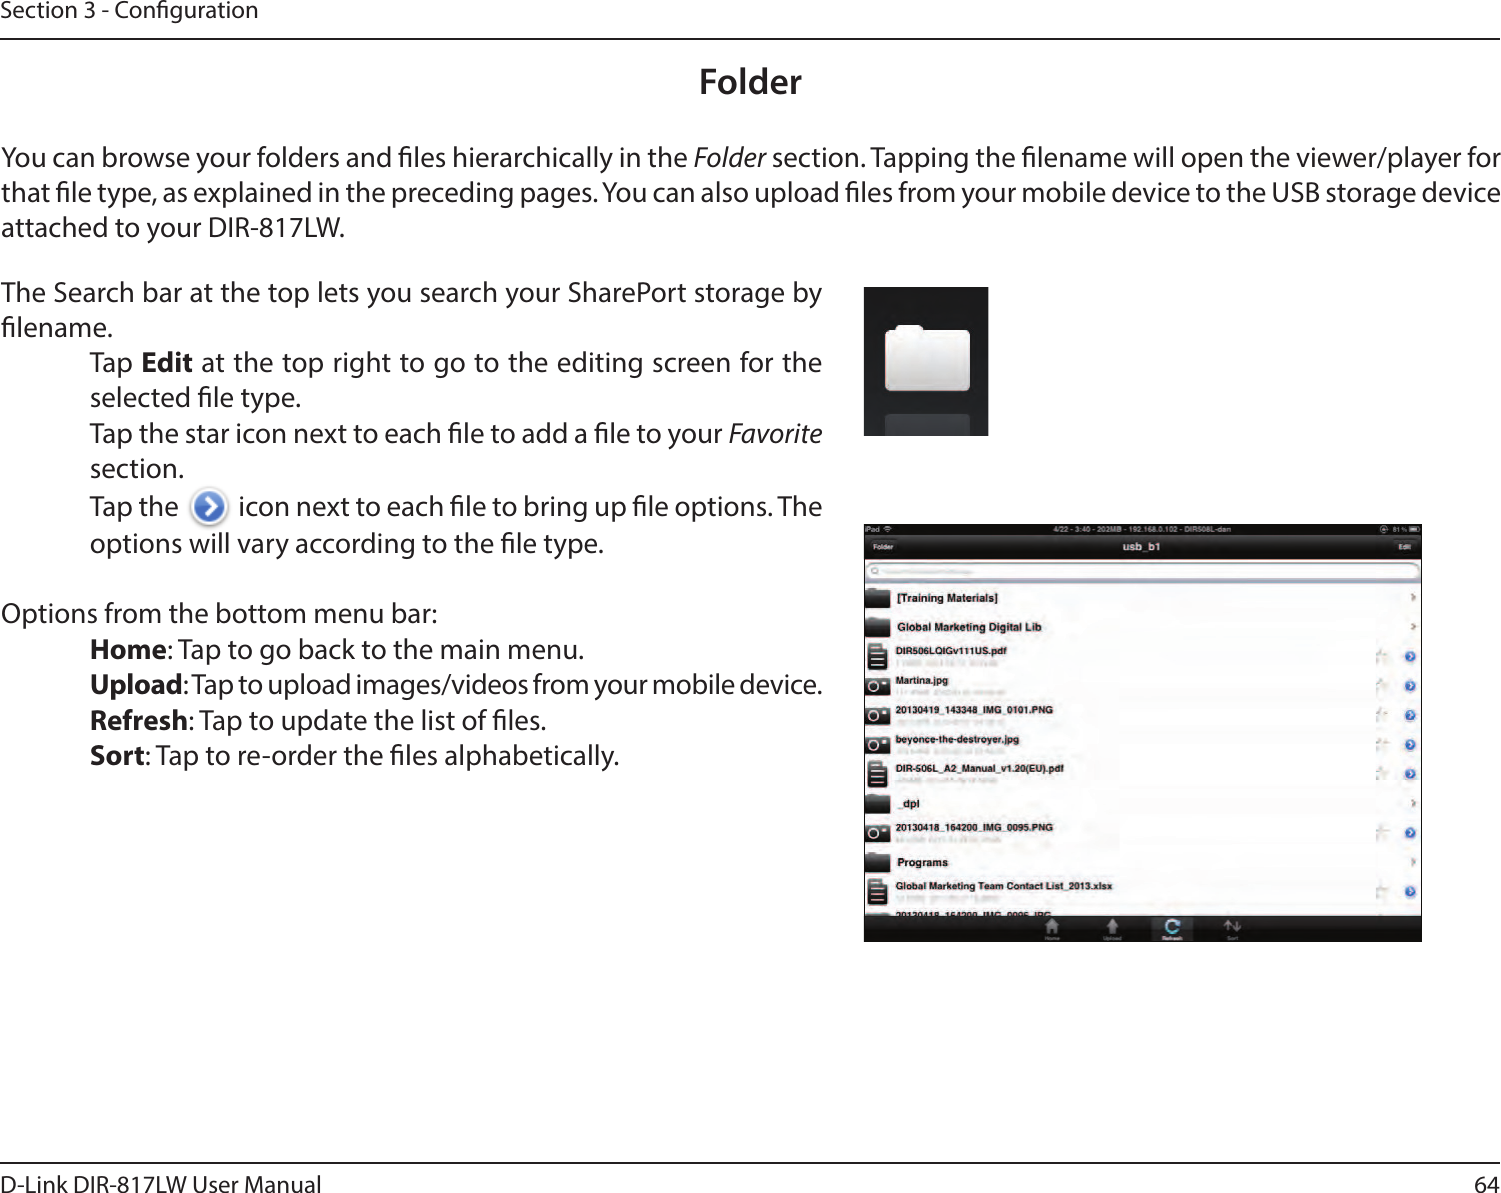 64D-Link DIR-817LW User ManualSection 3 - CongurationFolderYou can browse your folders and les hierarchically in the Folder section. Tapping the lename will open the viewer/player for that le type, as explained in the preceding pages. You can also upload les from your mobile device to the USB storage device attached to your DIR-817LW.The Search bar at the top lets you search your SharePort storage by lename.Tap Edit at the top right to go to the editing screen for the selected le type.Tap the star icon next to each le to add a le to your Favorite section.Tap the   icon next to each le to bring up le options. The options will vary according to the le type.Options from the bottom menu bar:Home: Tap to go back to the main menu.Upload: Tap to upload images/videos from your mobile device.Refresh: Tap to update the list of les.Sort: Tap to re-order the les alphabetically.